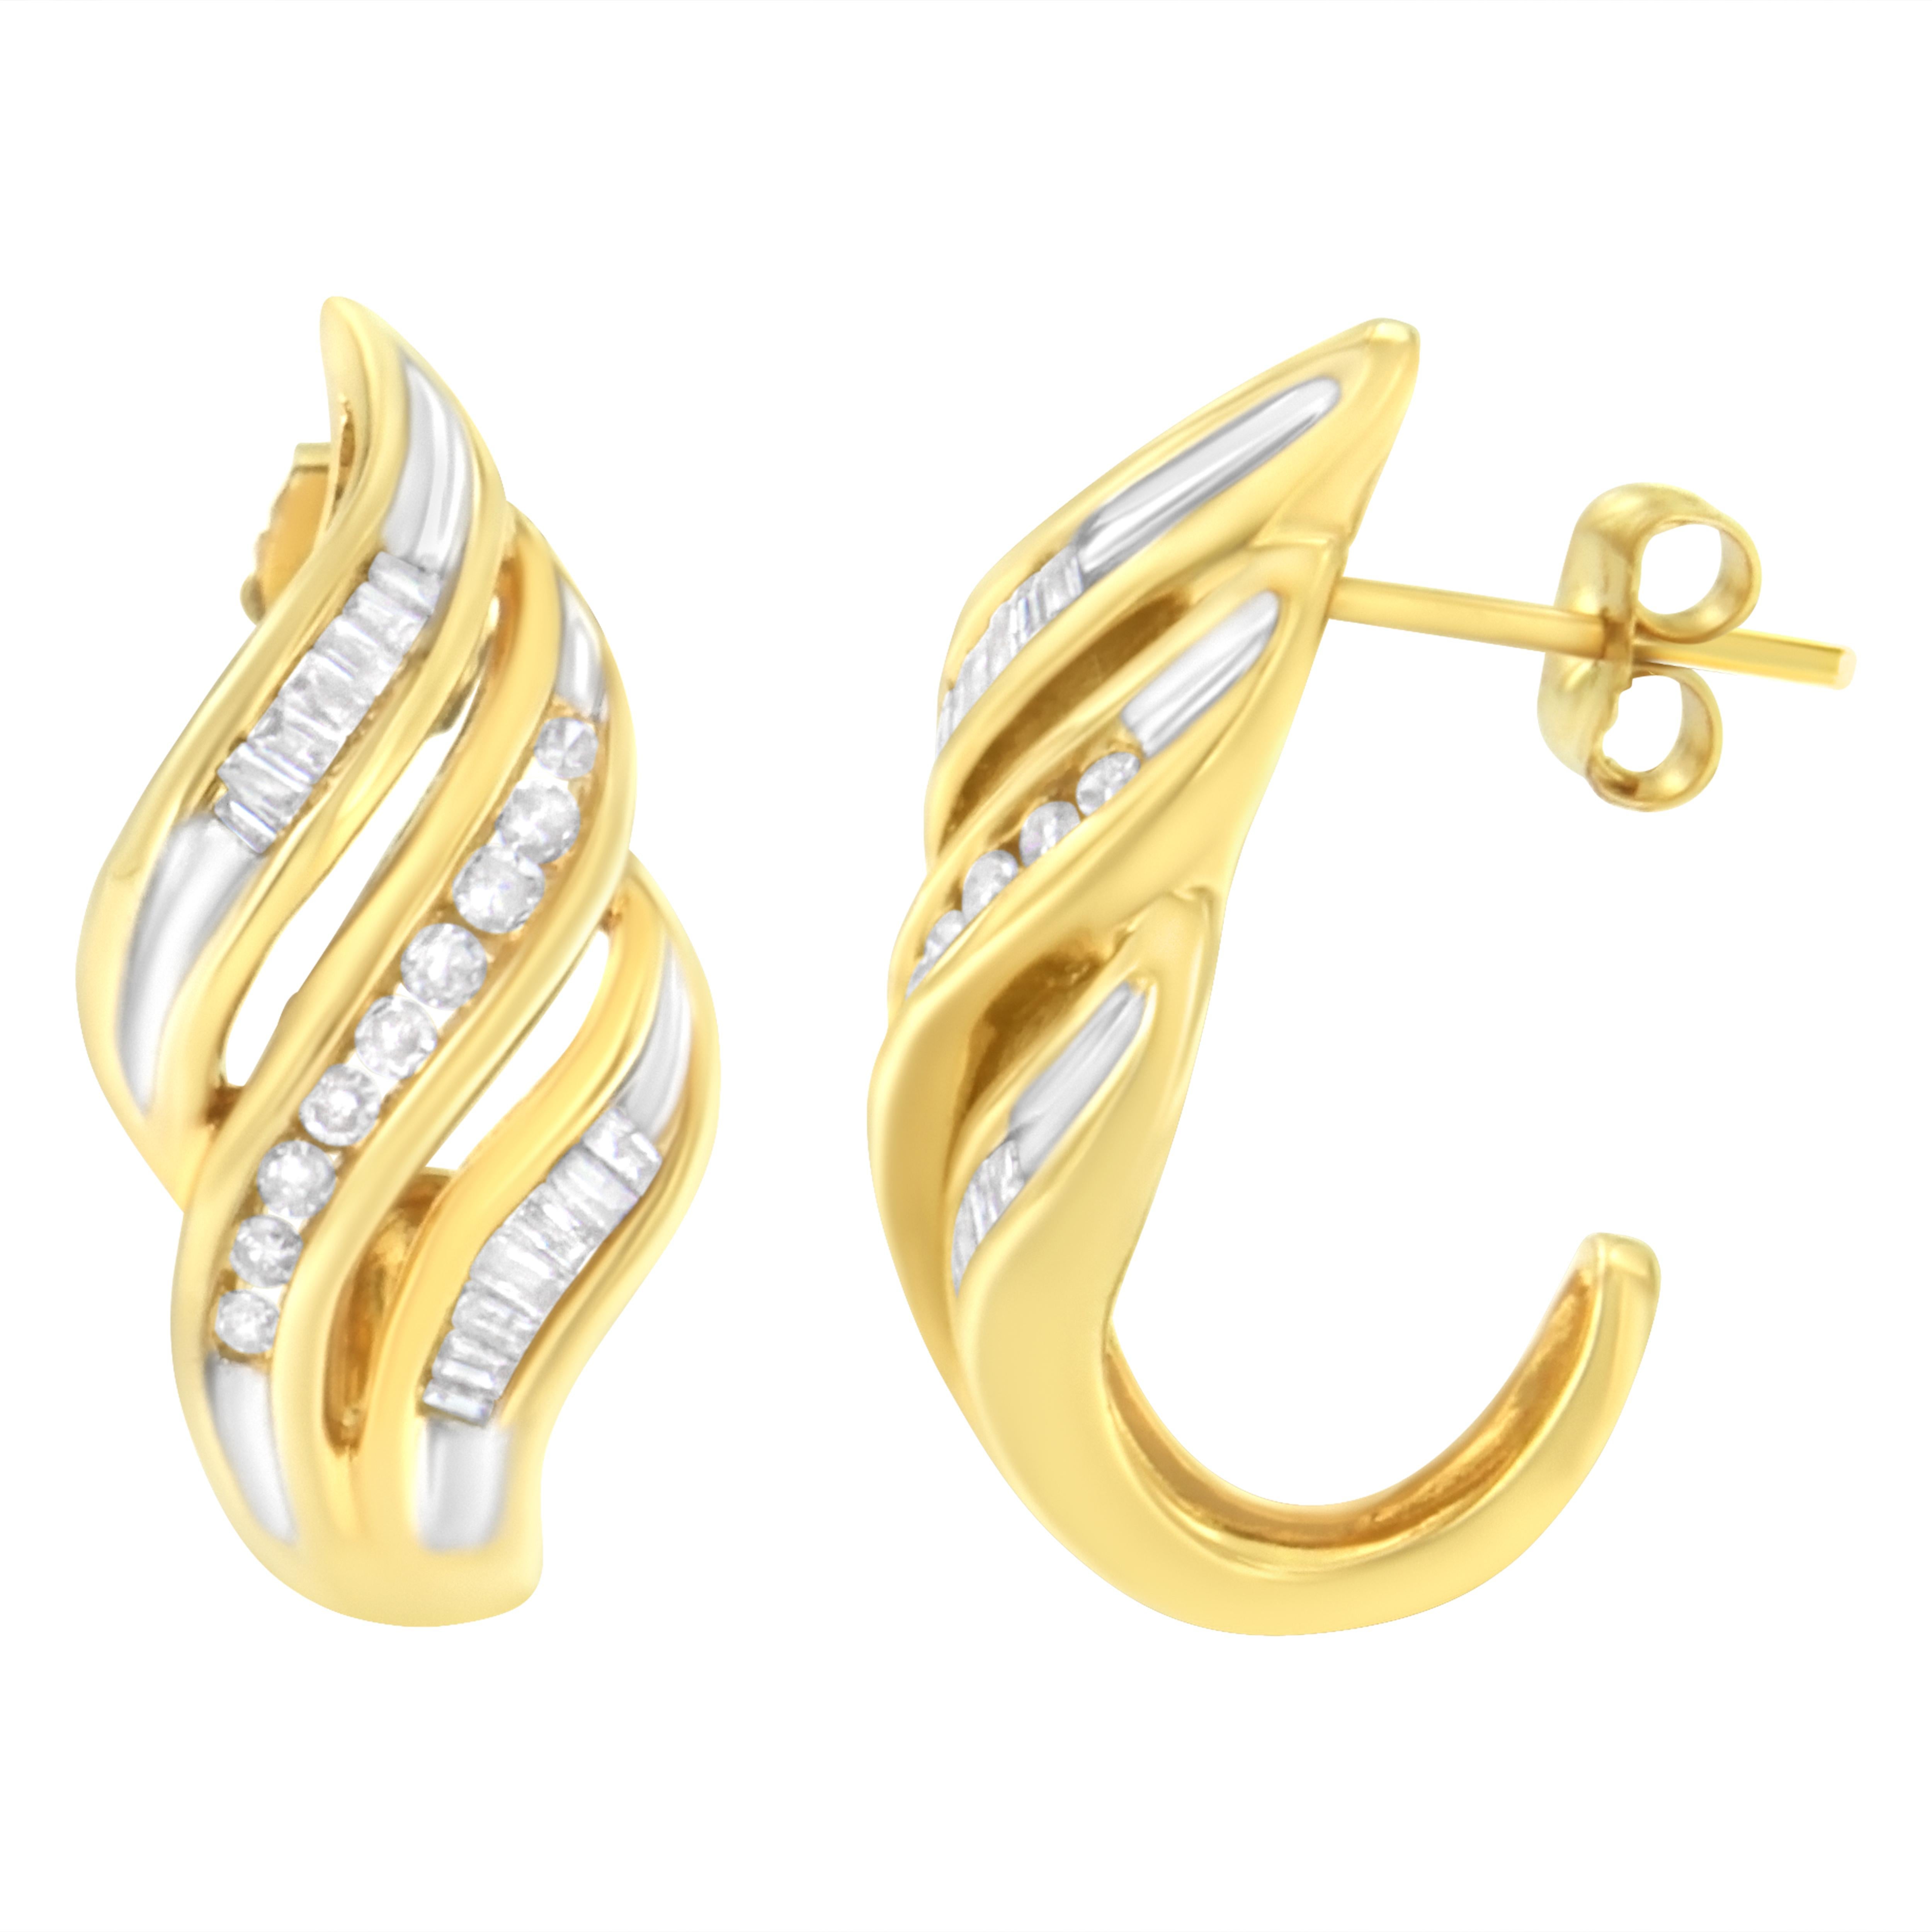 Crafted in 10k yellow gold, these earrings have a striking design. 3 separate ribbons of yellow gold delicately flow to create soft curves that meet at the bottom of the design creating an spiral effect. Each ribbon is inlaid by a row of channel set